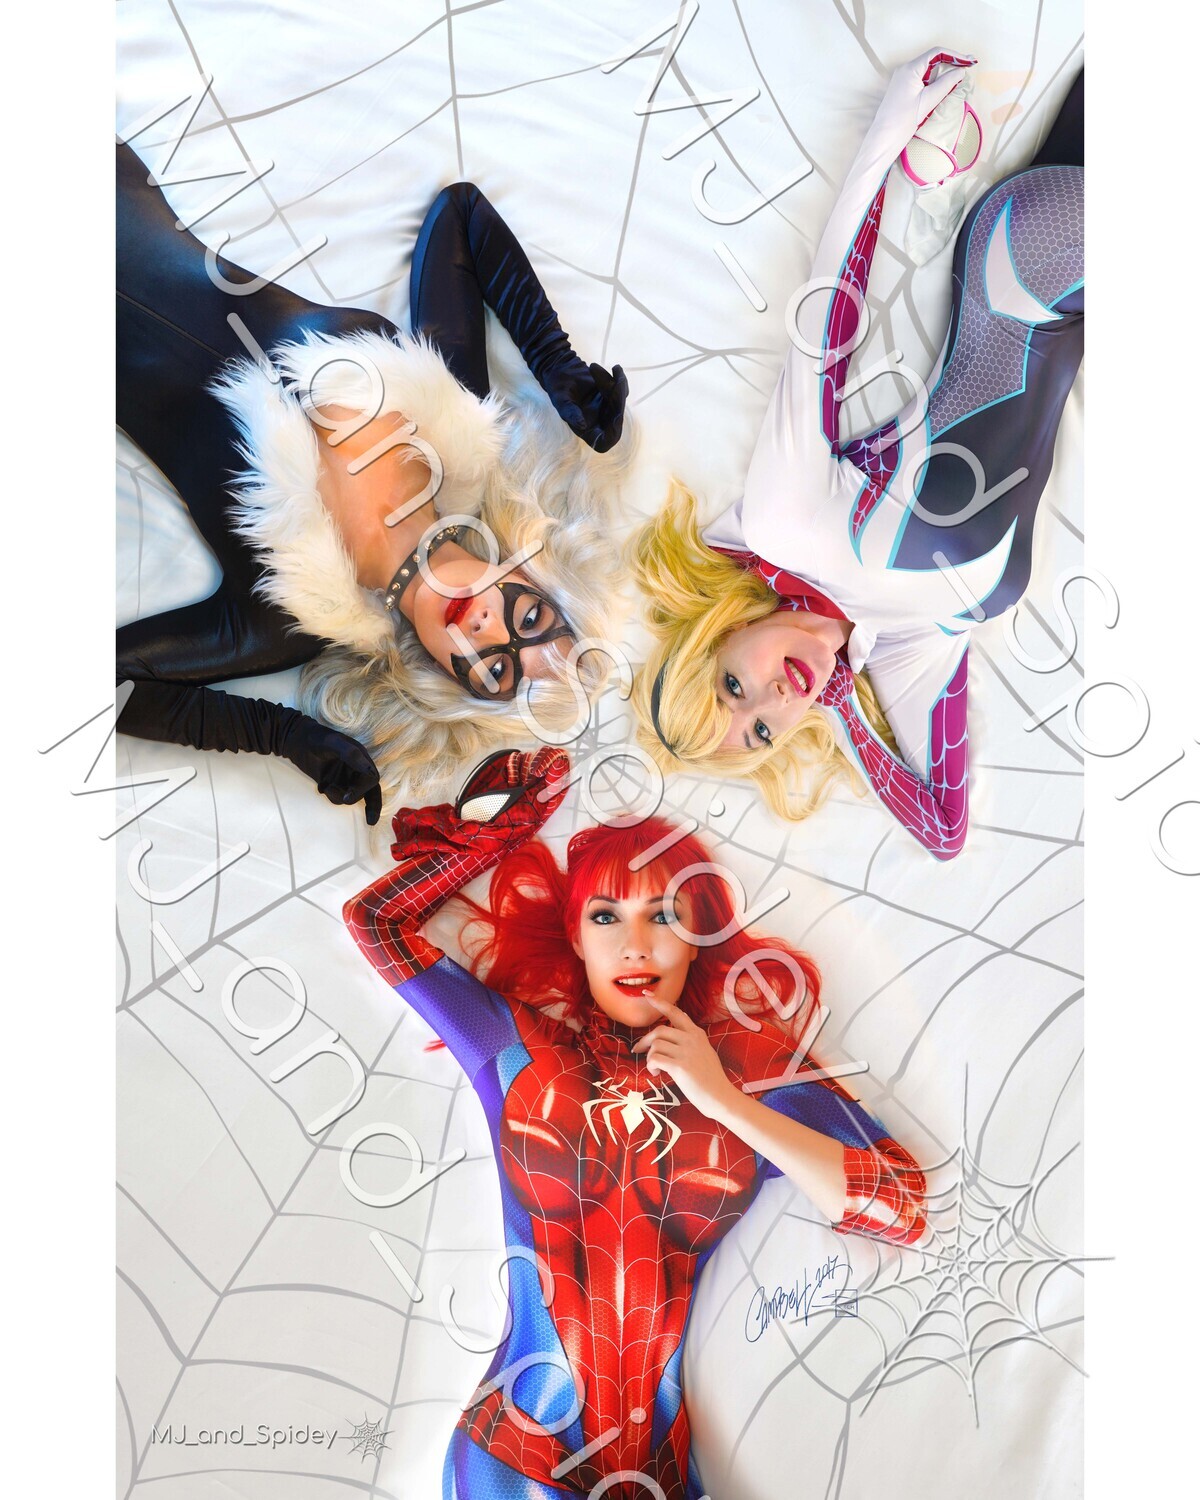 Marvel - Spider-Man - Mary Jane Watson - Spider-Girls 2 - Cosplay Print (@MJ_and_Spidey, MJ and Spidey, Comics)